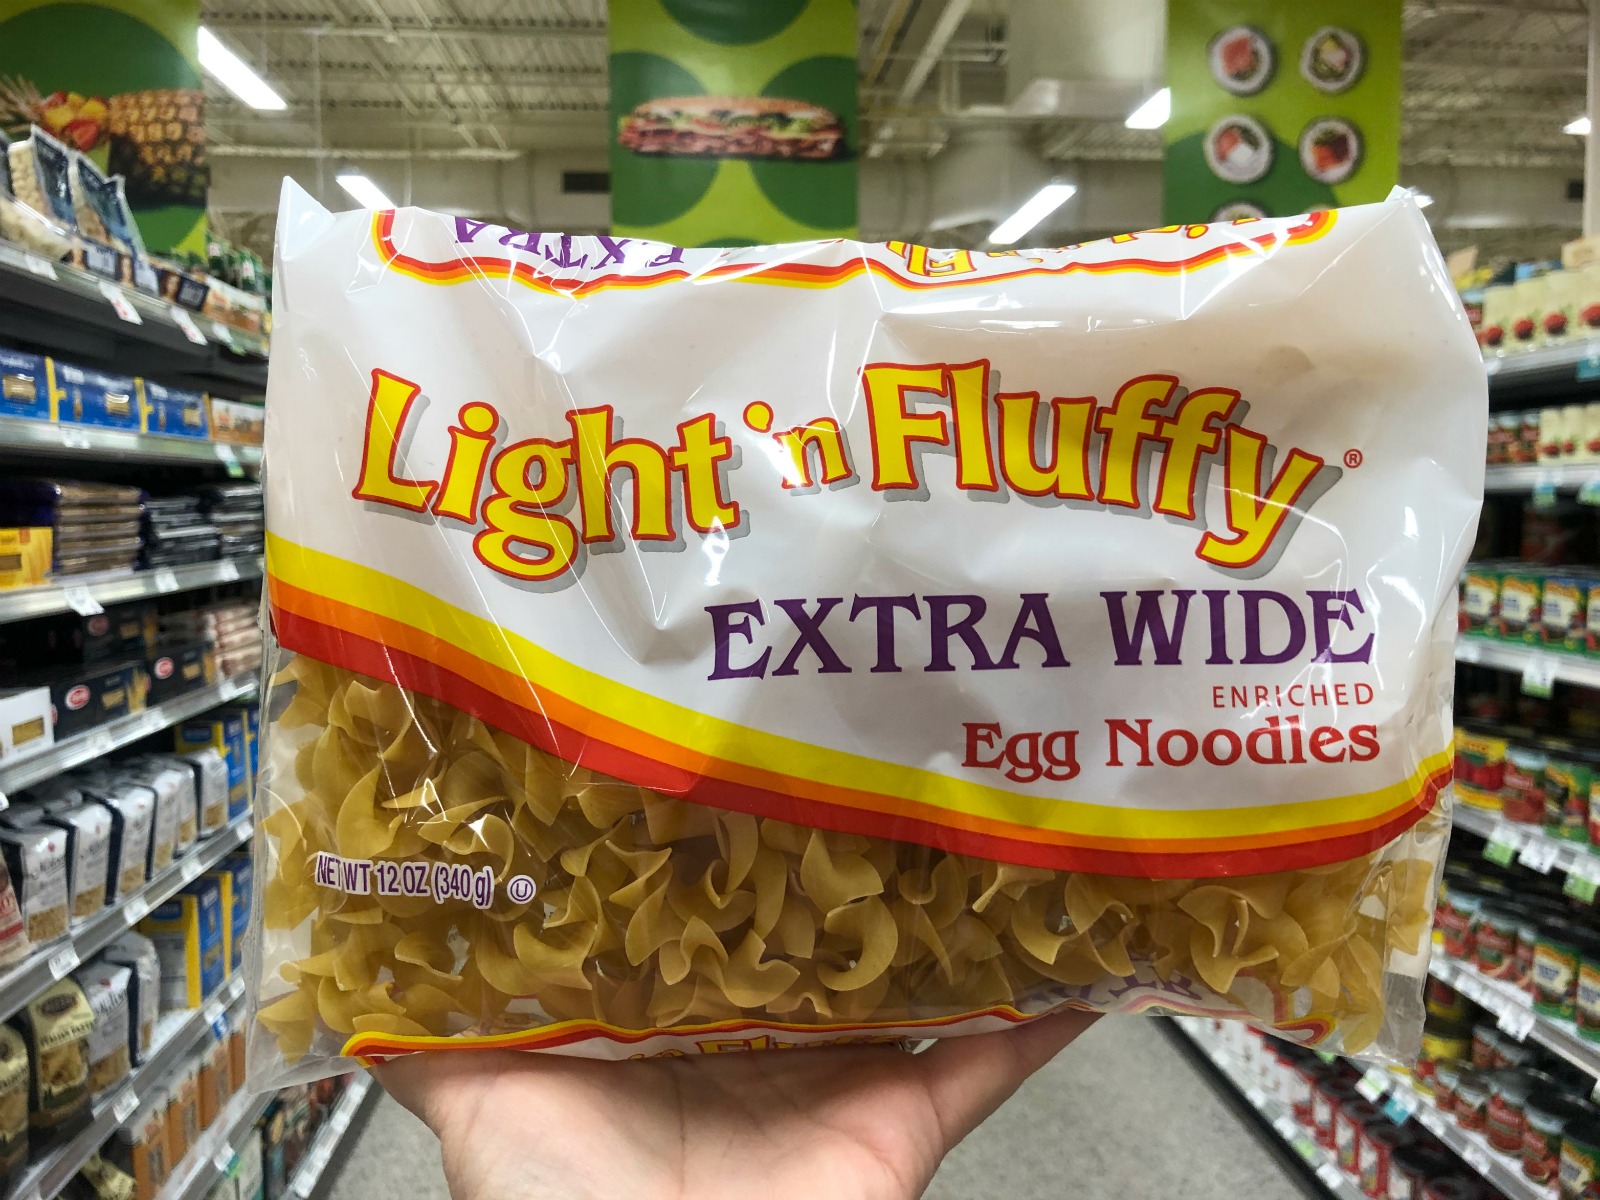 Delicious Recipe Ideas Using Light ‘n Fluffy Egg Noodles